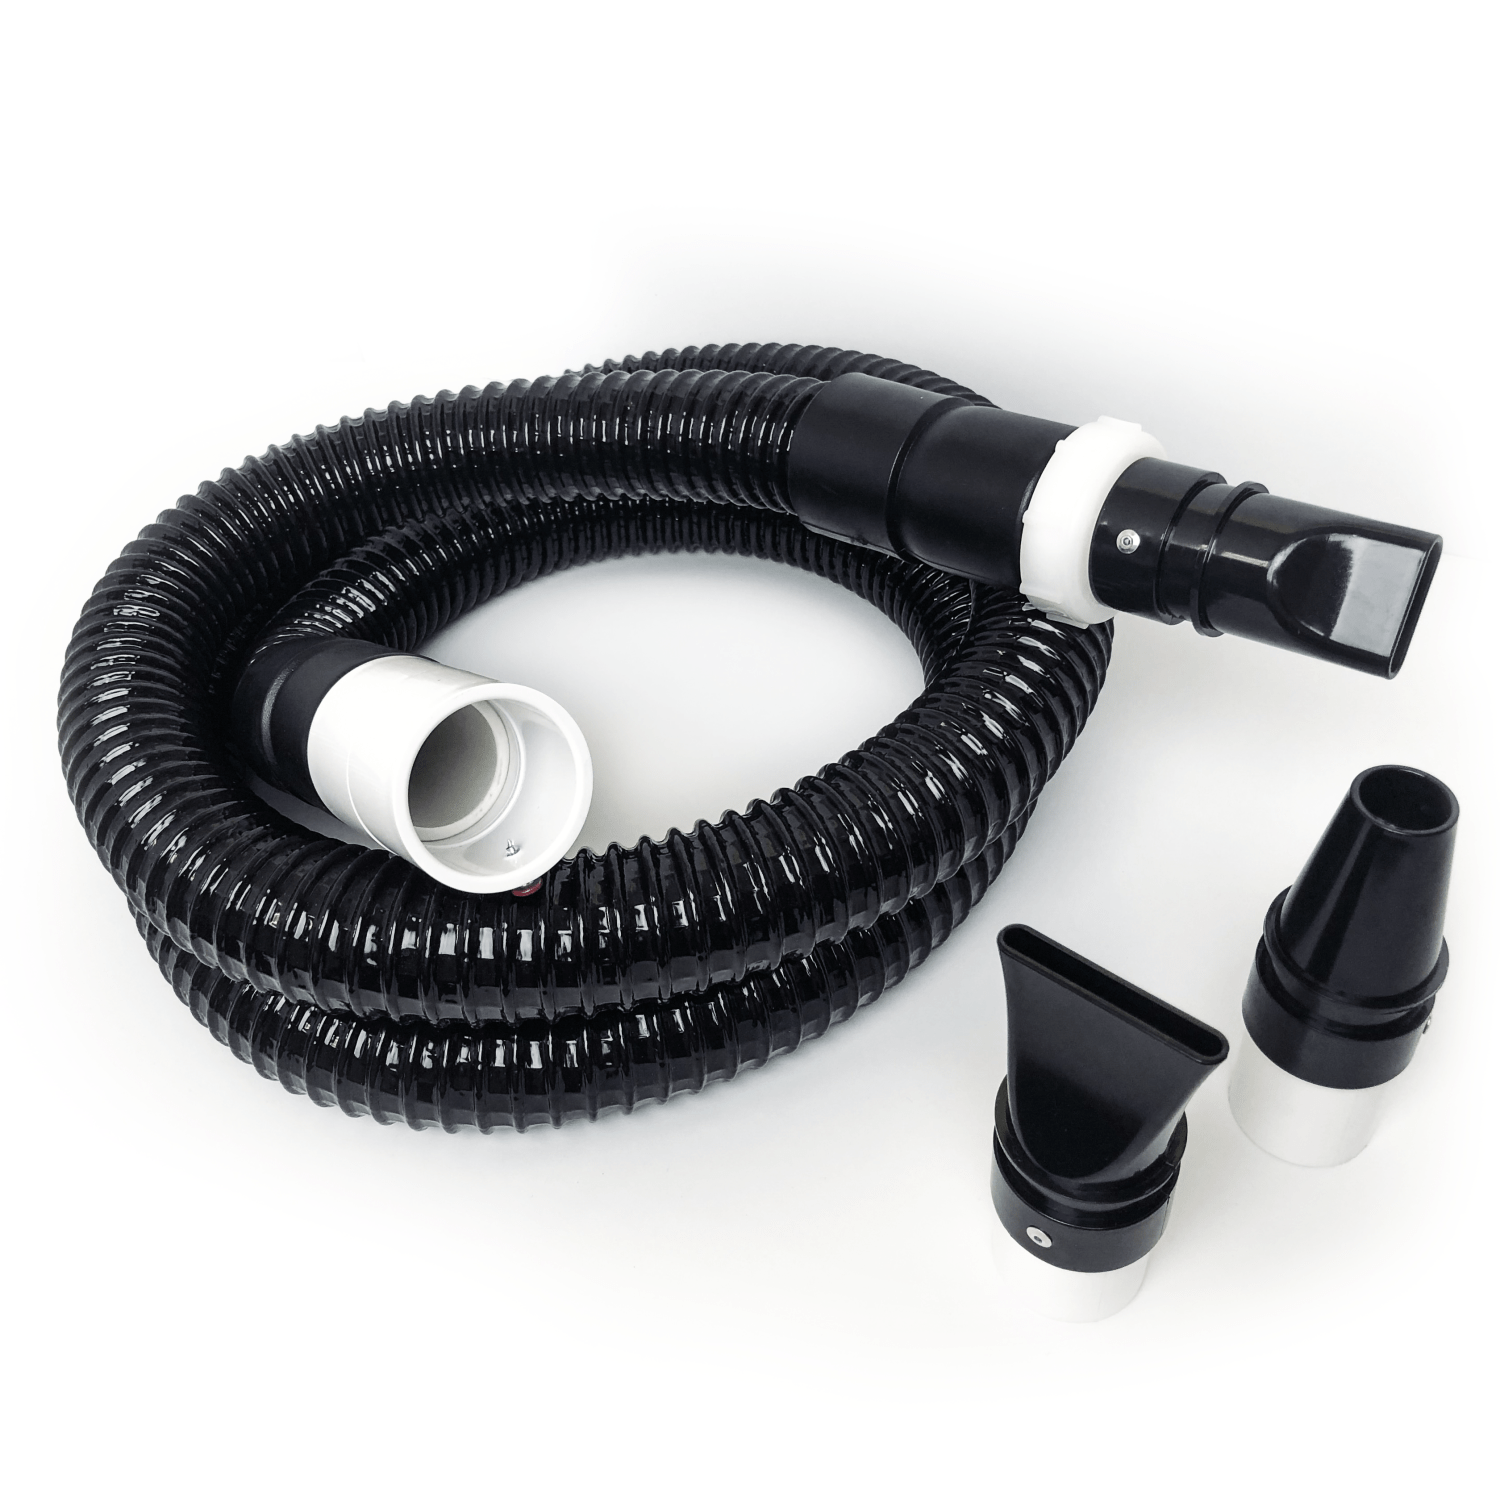 Spare Part: 8' Hose with 3 Piece Nozzle Assembly